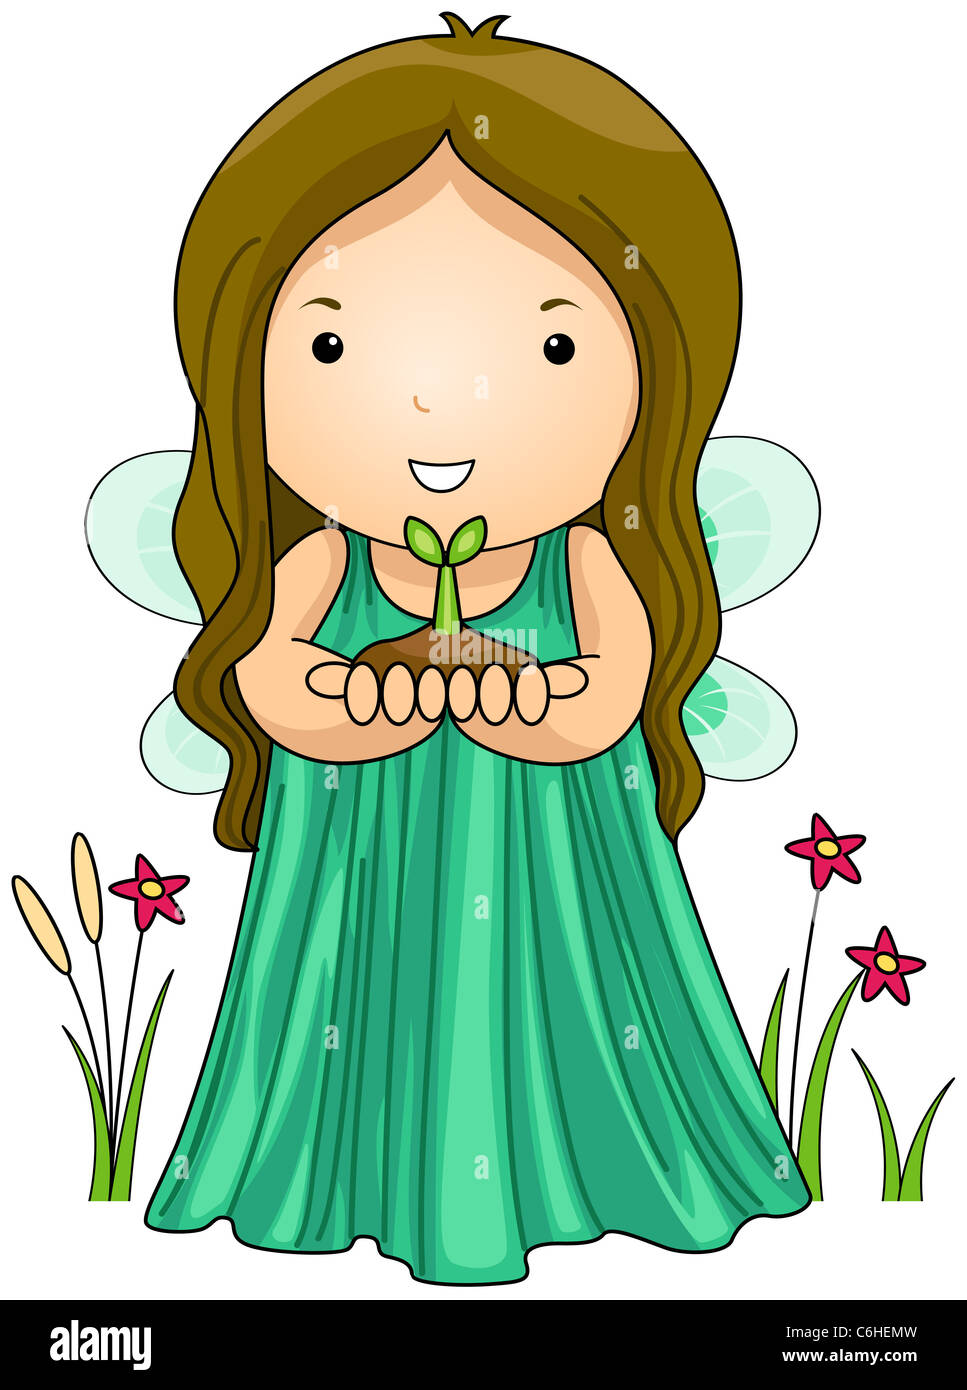 Illustration of an Earth Fairy Carrying a Seedling Stock Photo